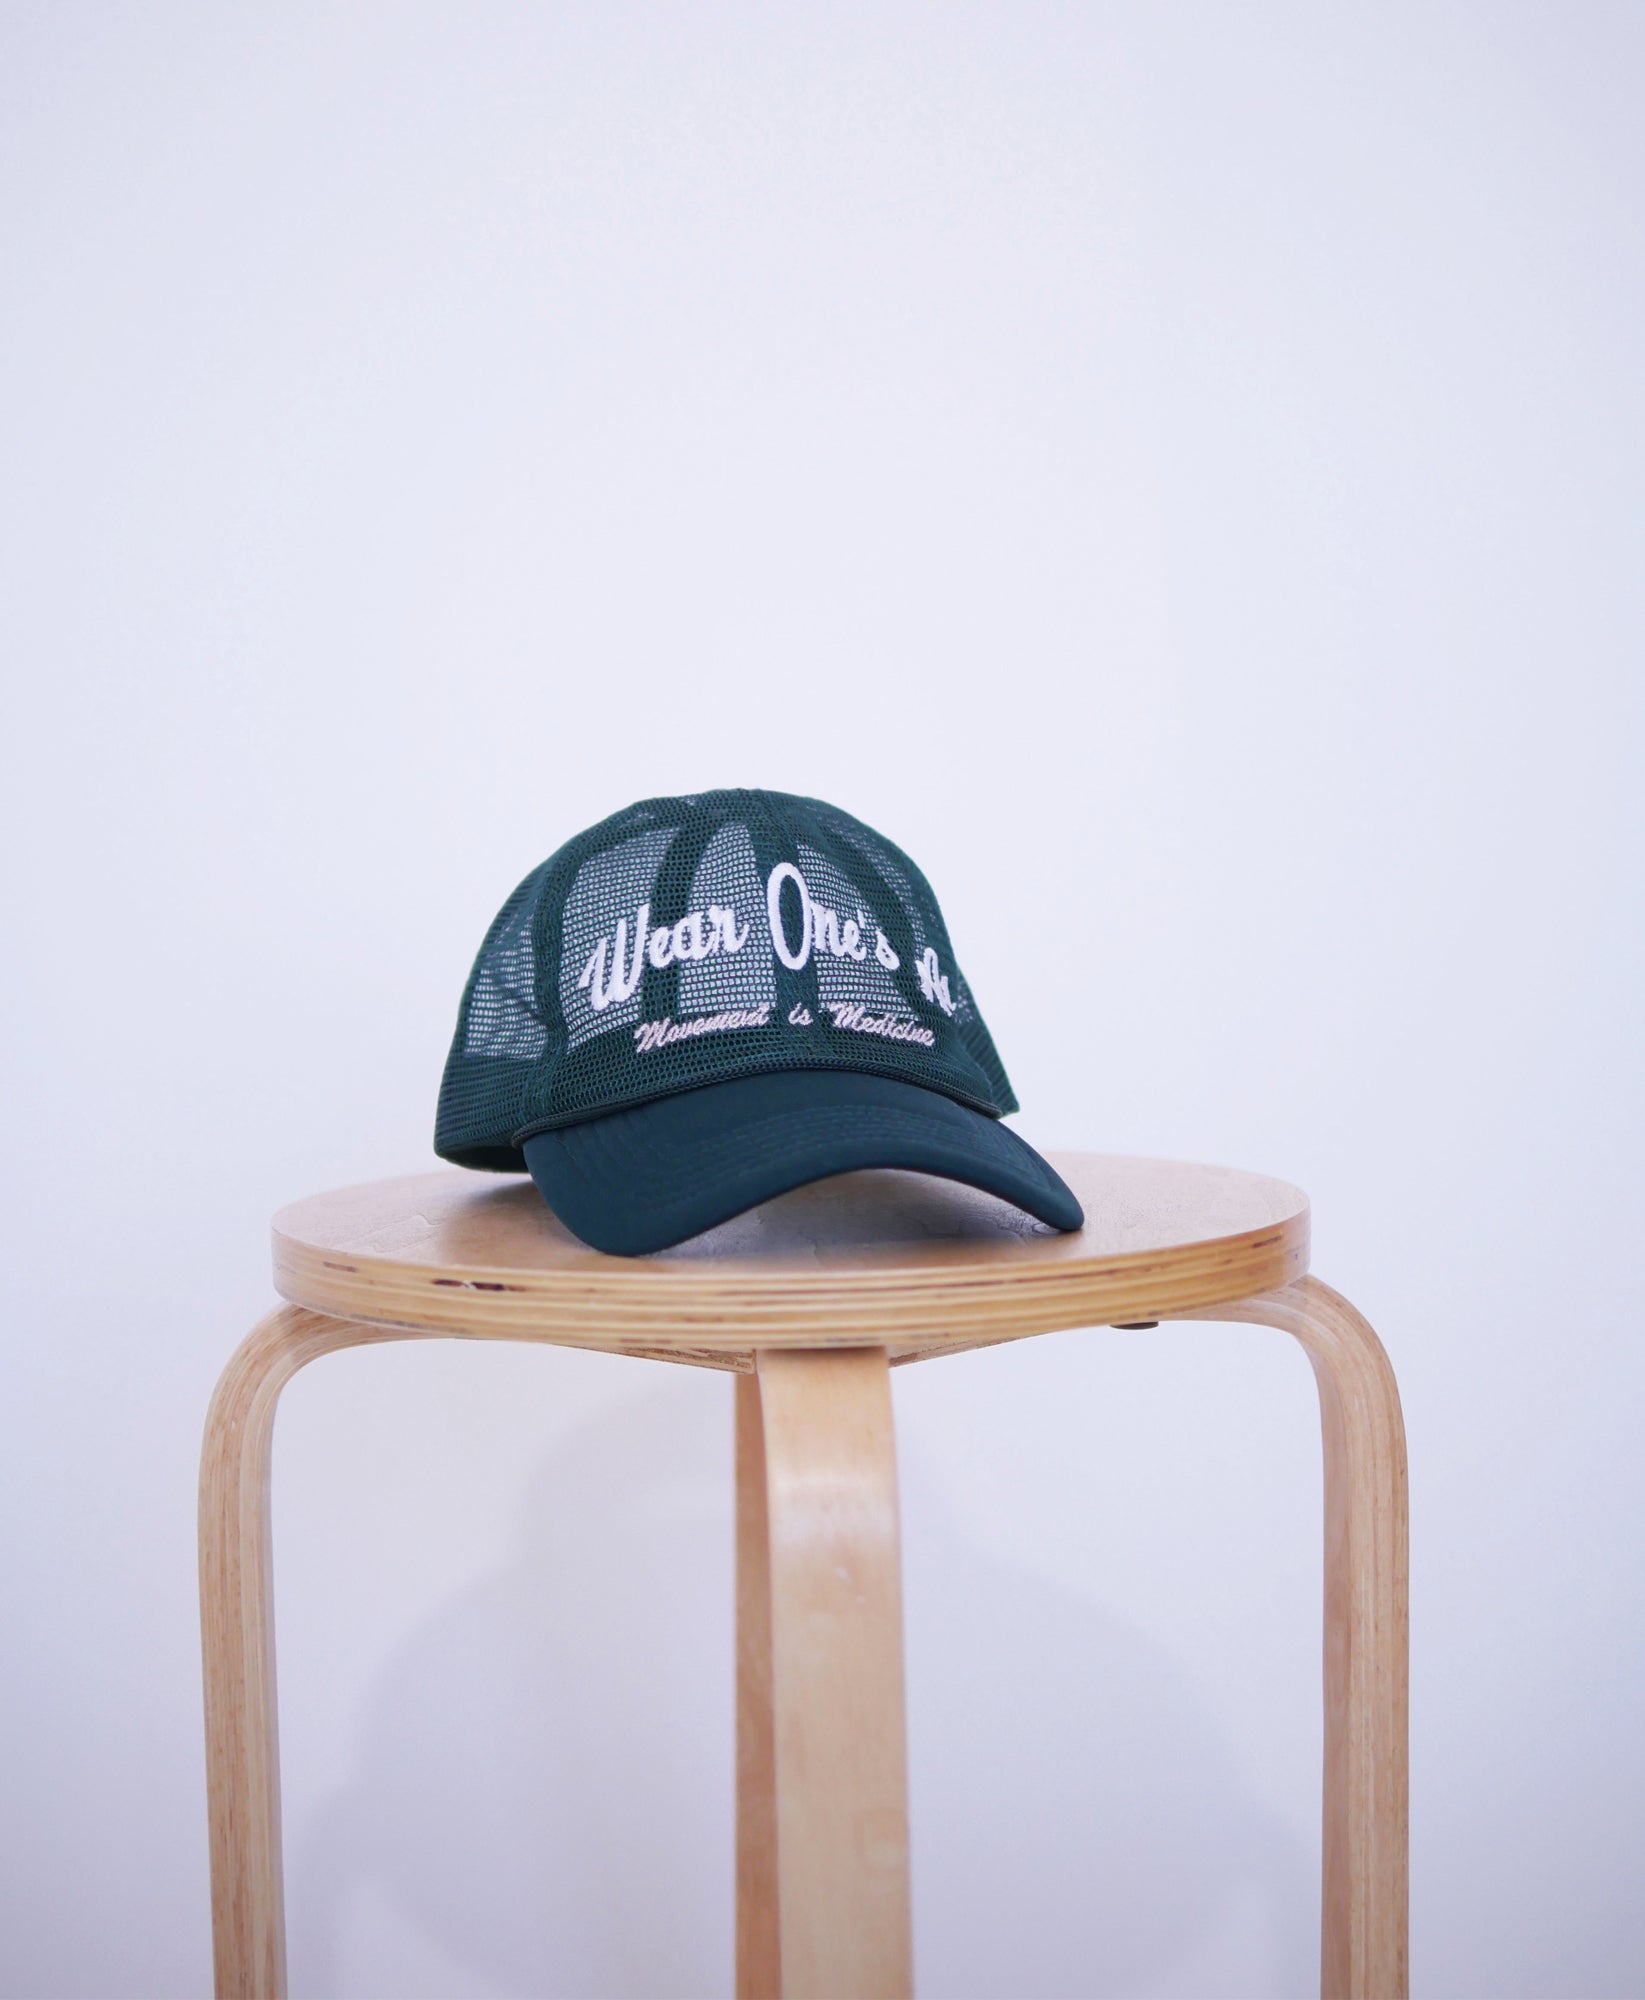 Wear One's At Logo Trucker Hat in Pine Front View